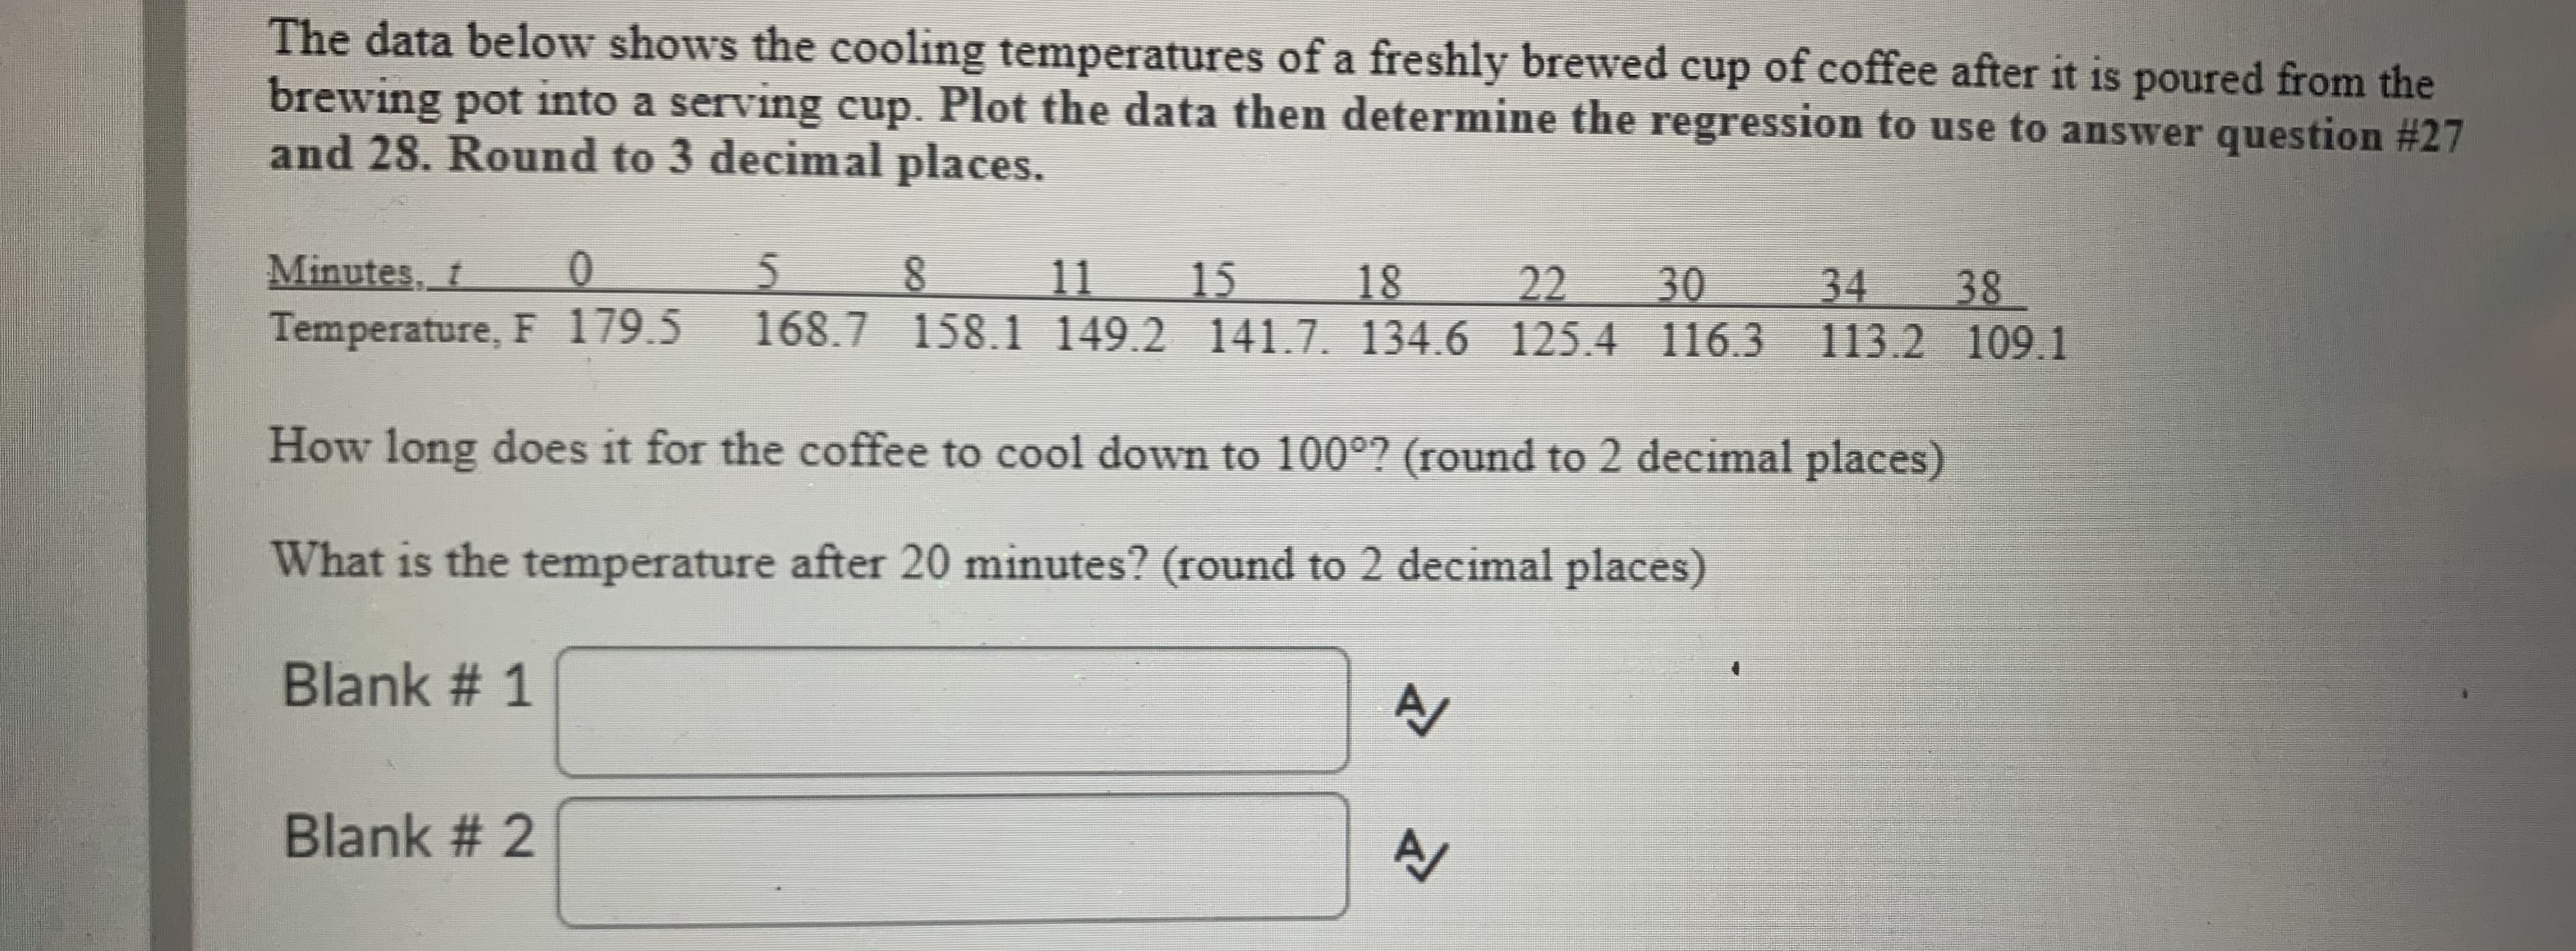 The data below shows the cooling temperatures of a freshly brewed cup of coffee after it is poured from the
brewing pot into a serving cup. Plot the data then determine the regression to use to answer question #27
and 28. Round to 3 decimal places.
Minutes, t
01
5 8
11
15
18
22
30
34
38
Temperature, F 179.5 168.7 158.1 149.2 141.7. 134.6 125.4 116.3 113.2 109.1
How long does it for the coffee to cool down to 100°? (round to 2 decimal places)
What is the temperature after 20 minutes? (round to 2 decimal places)
Blank # 1
Blank # 2
